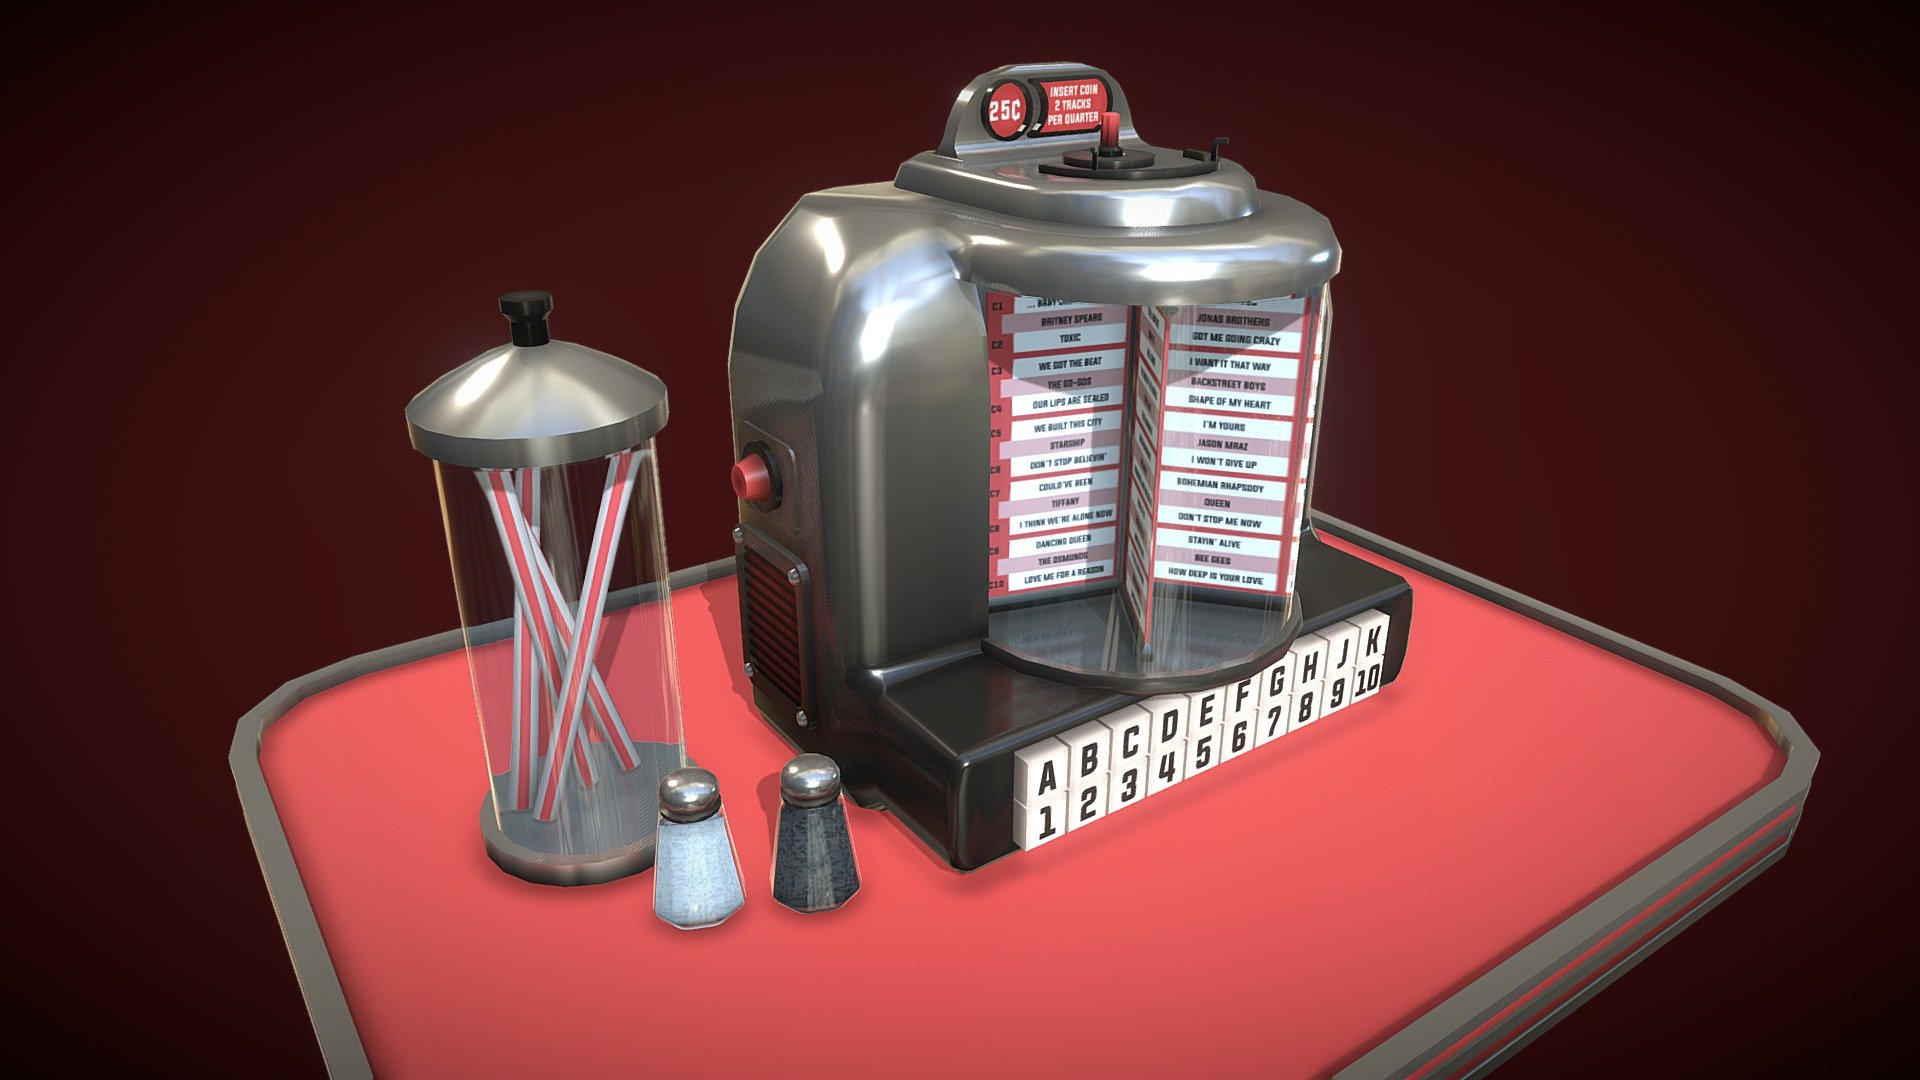 I made this to test out using PBR for my personal Final Year Project which is still in its pre-production/concept stage. Since I saw this #RetroElectronicsChallenge challenge, I thought why not make something new. I have never seen one of these in real life so I took some &ldquo;artistic liberties